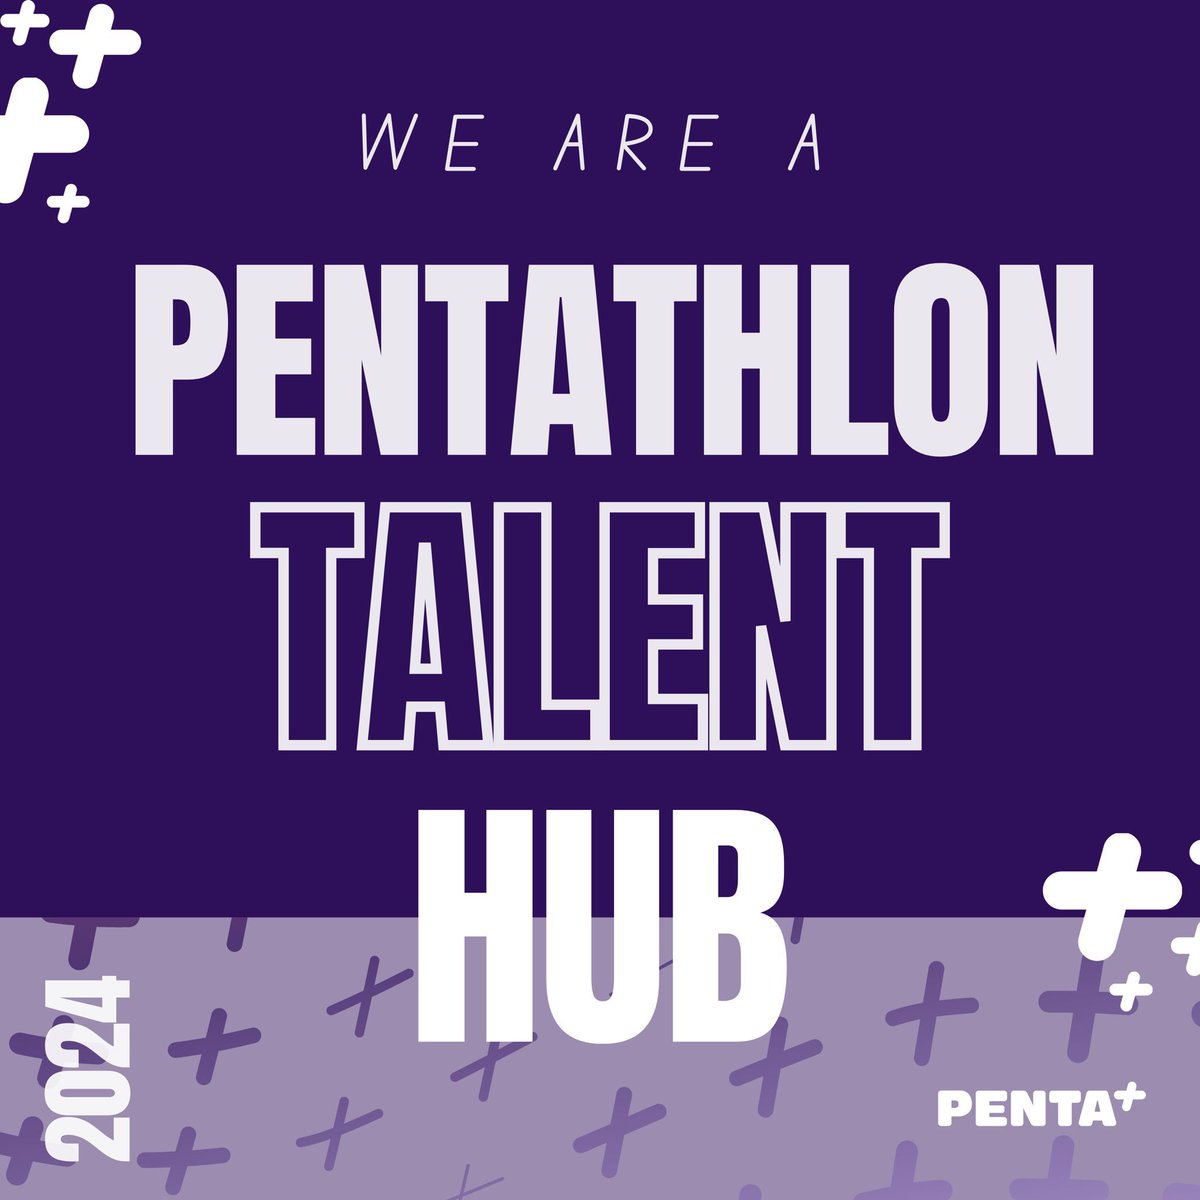 📣WE ARE A PENTATHLON HUB 📣 We are delighted to announce Millfield Modern Pentathlon Community Club has been recognised as a Pentathlon Hub! We have been accredited a Pentathlon Talent Hub 🤩 ✨More information how to get involved coming next…✨